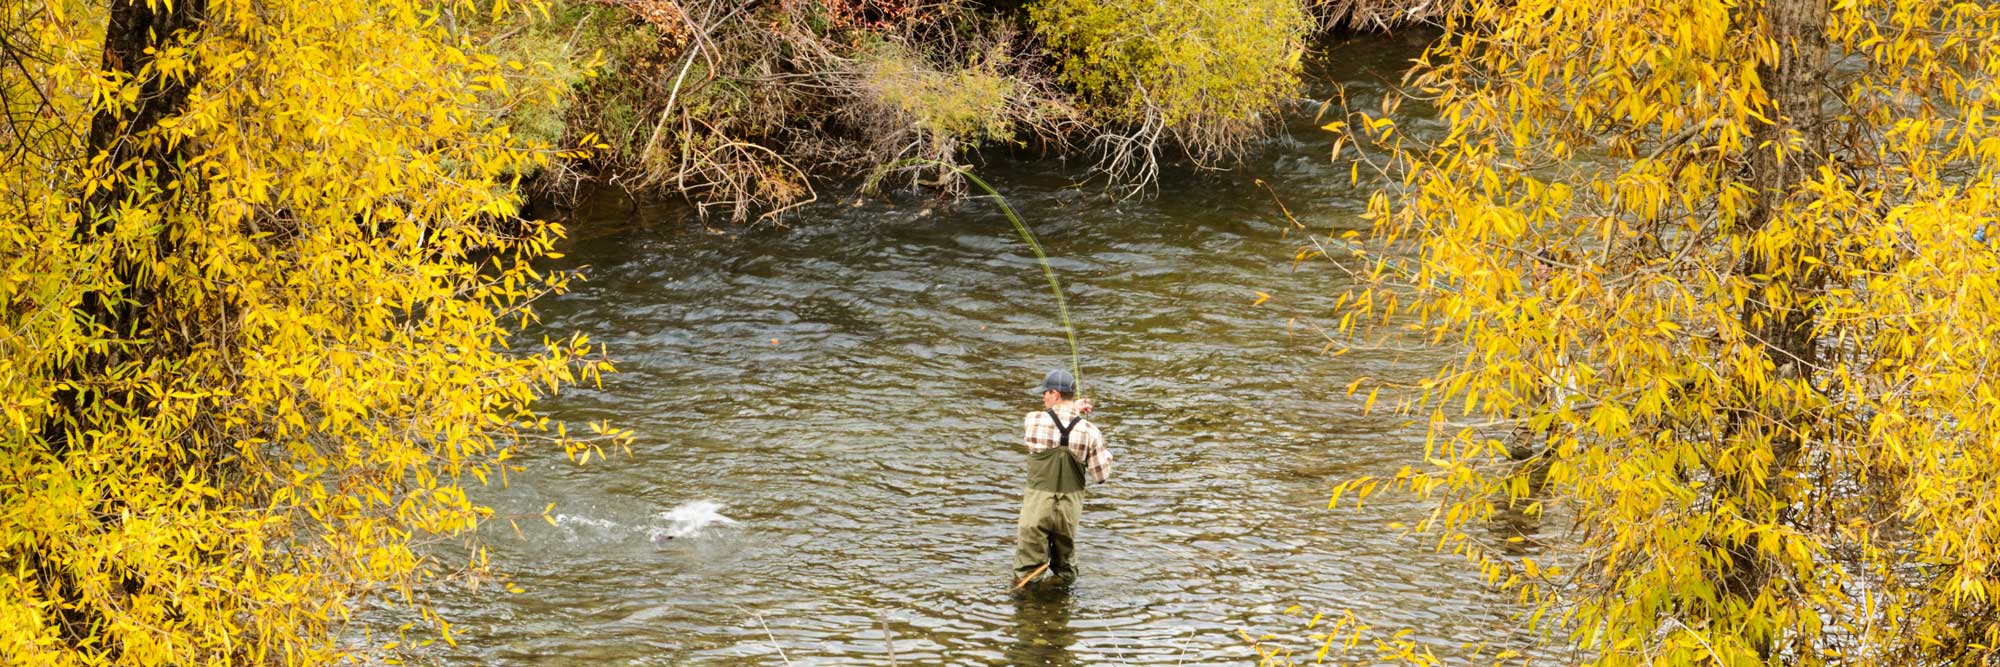 The Best Things To Do In Bozeman In The Fall - Go Fly Fishing